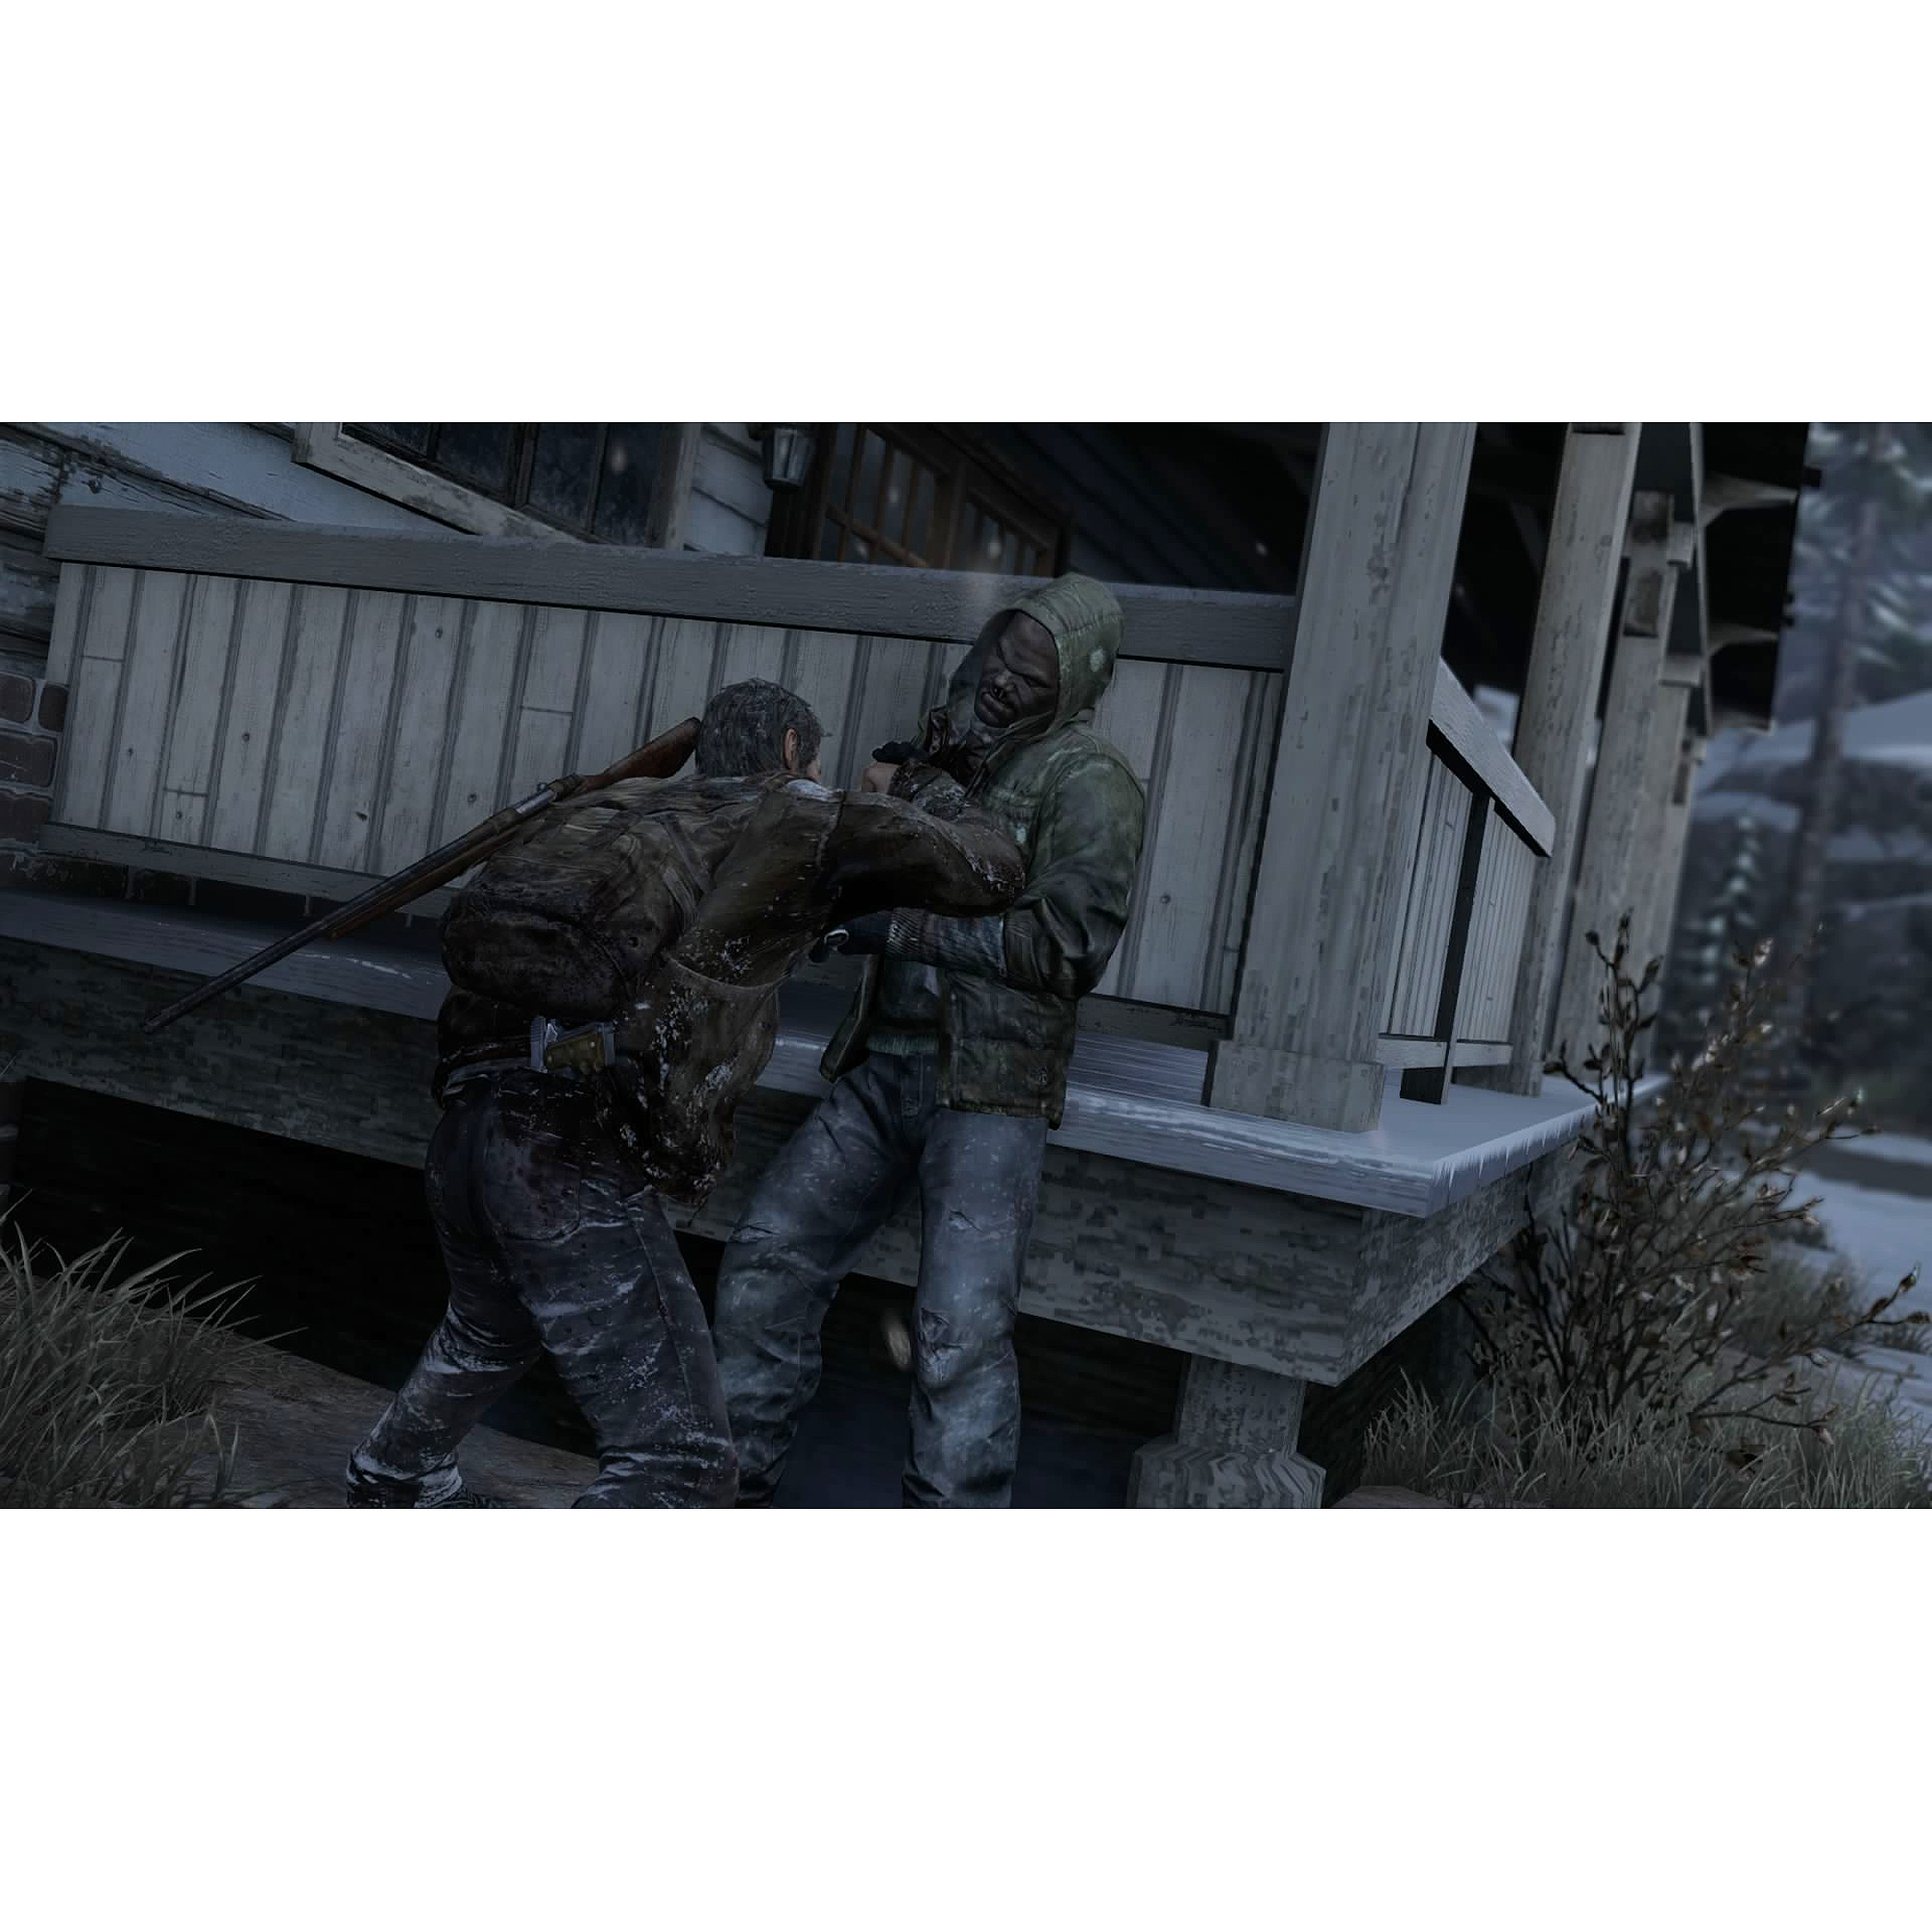 The Last of Us Remastered - PlayStation 4 - image 18 of 19